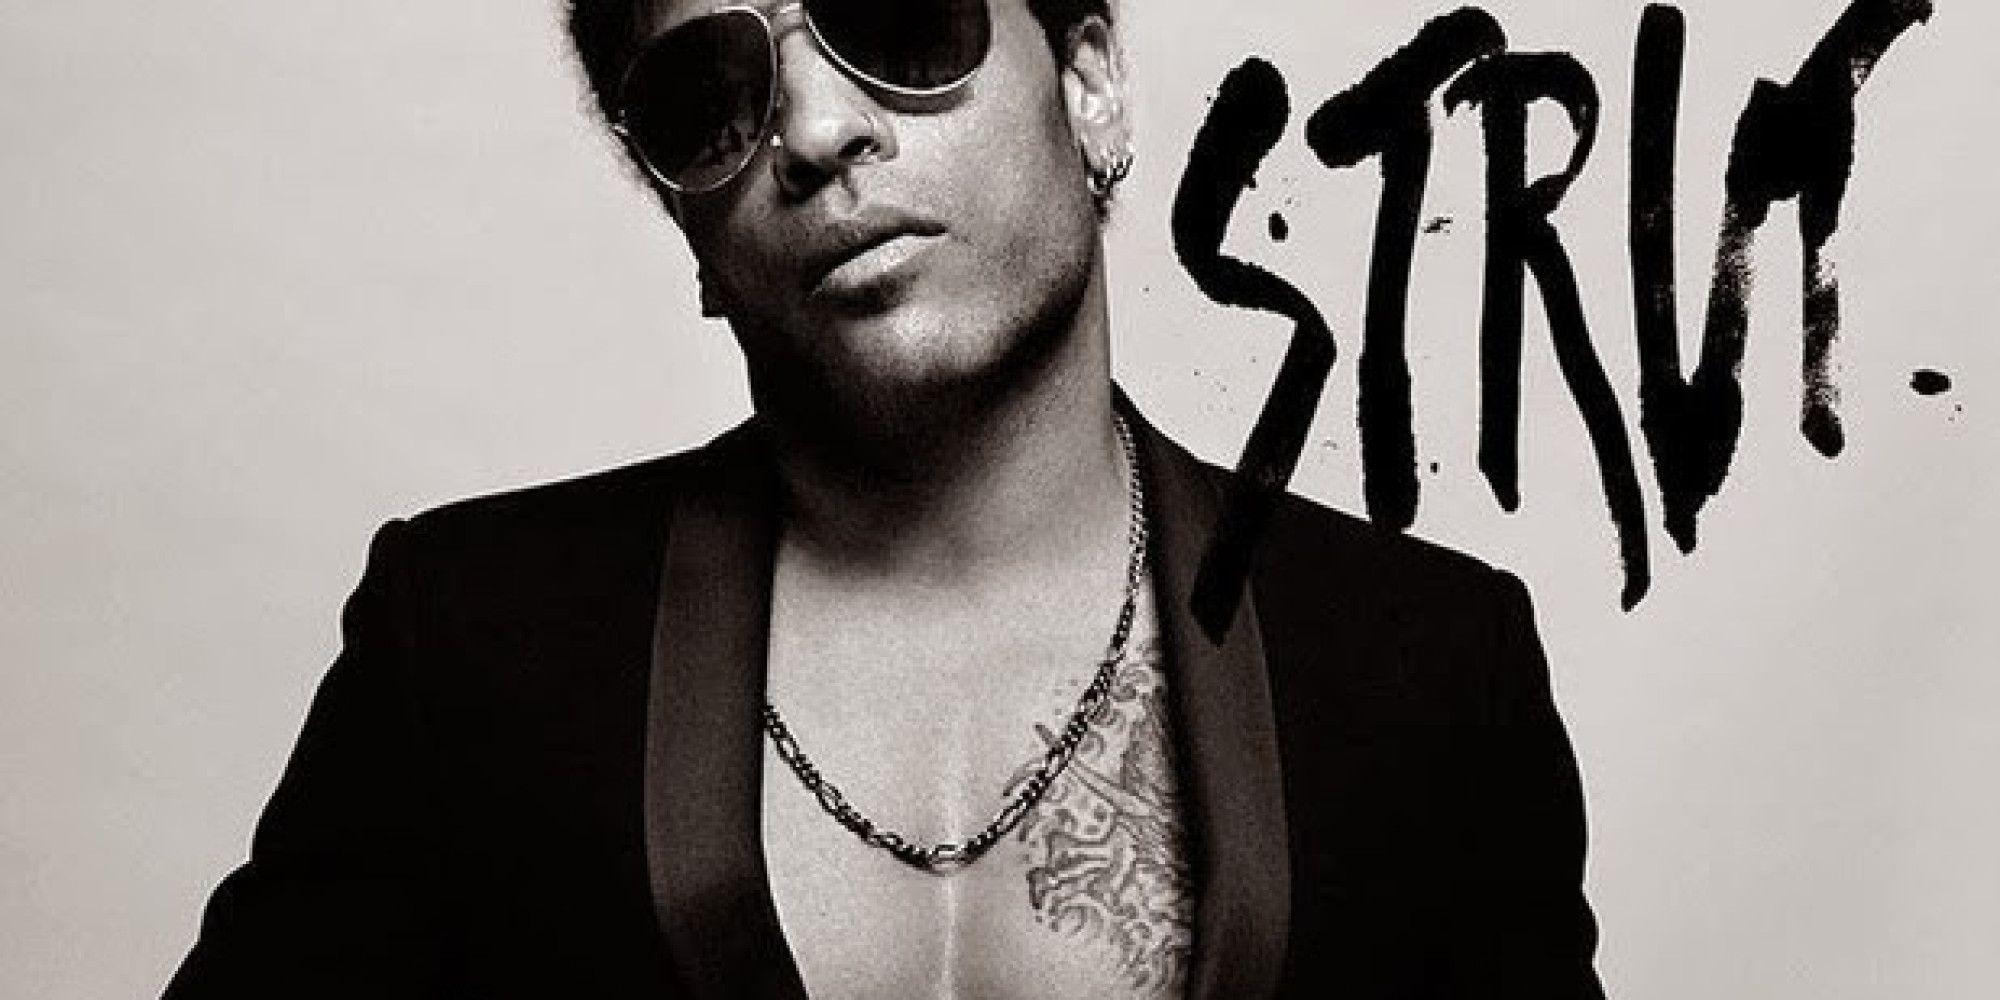 Lenny Kravitz On His New Album 'Strut' And His Dream Of Working With